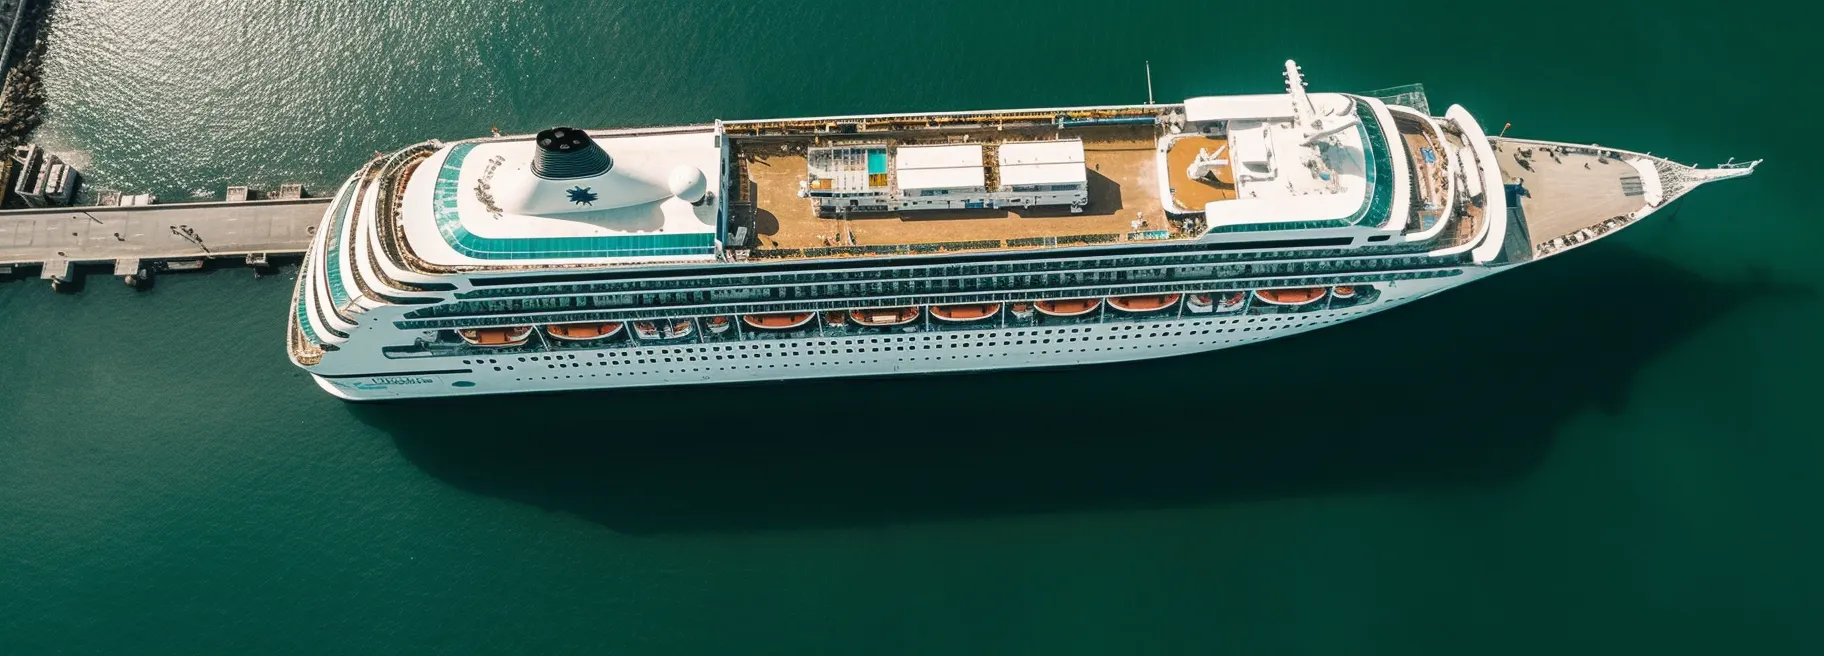 aerial scenic view shot of a cruise ship in Port of Miami